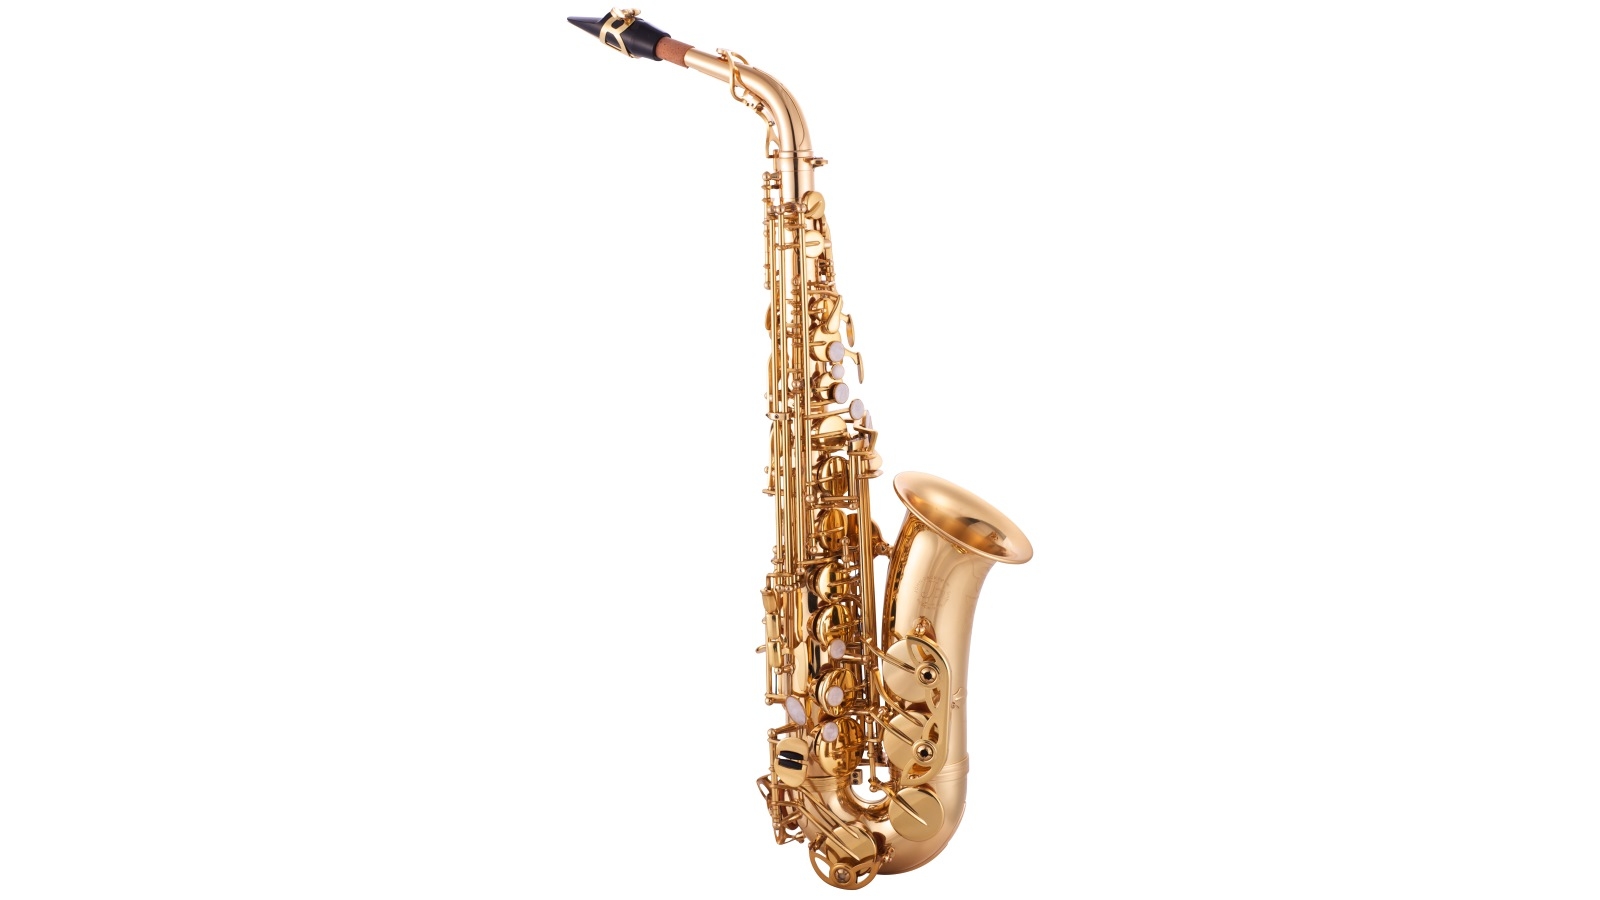 Alto Saxophone Stand Saxophone Wall Mount Holds Alto/Tenor Saxophones Securely Saves Space in the Room 